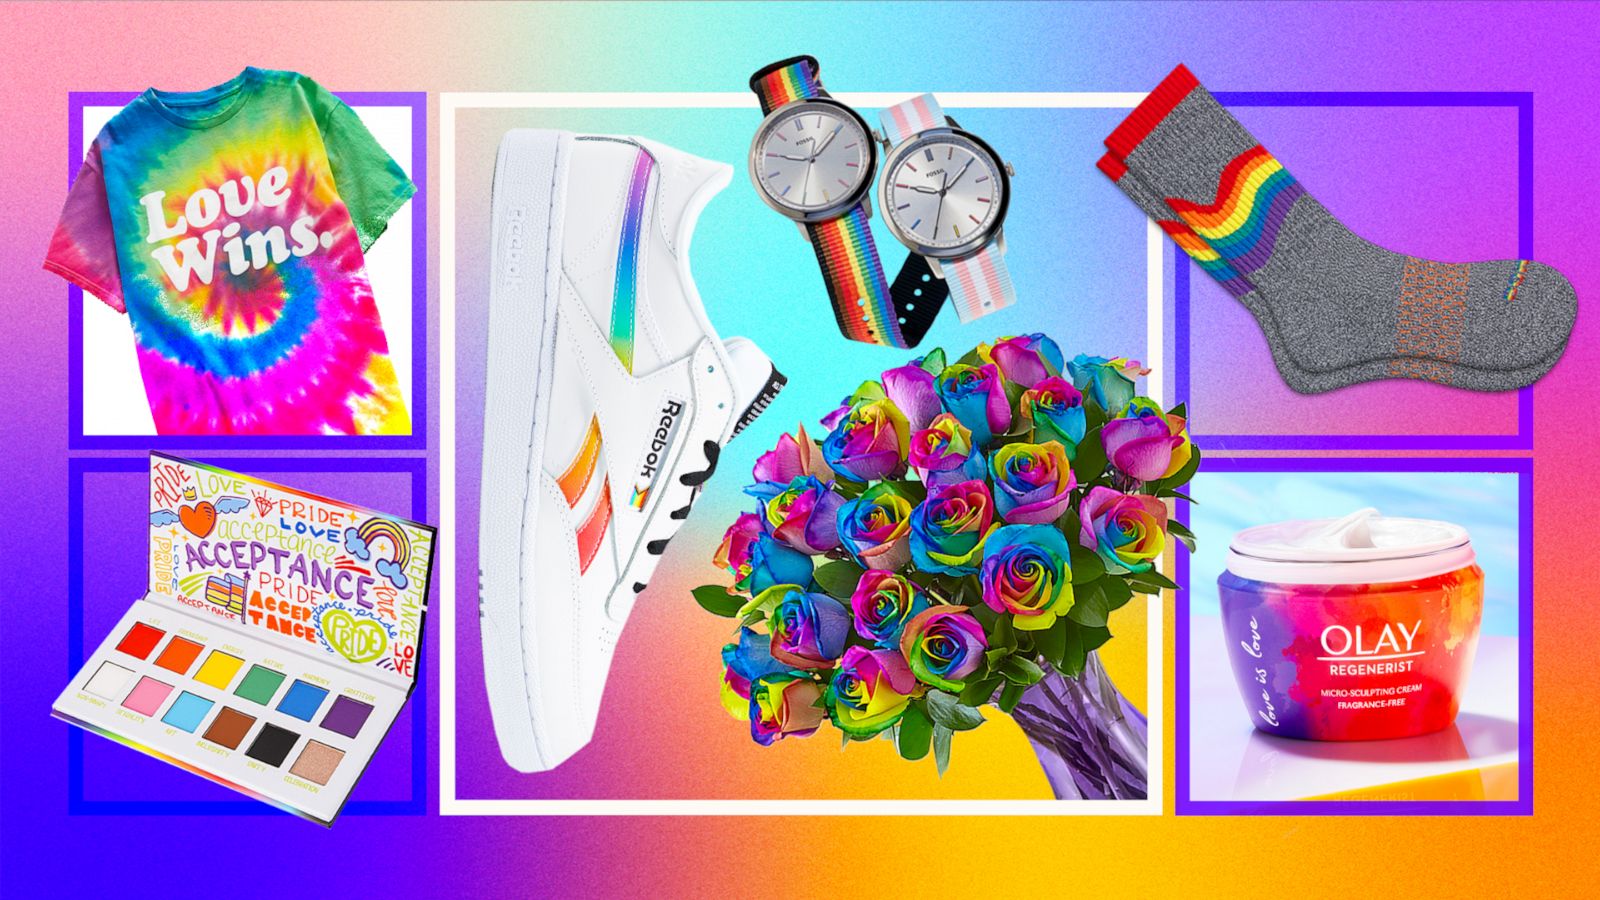 27 brands supporting LGBTQ pride in style - ABC News